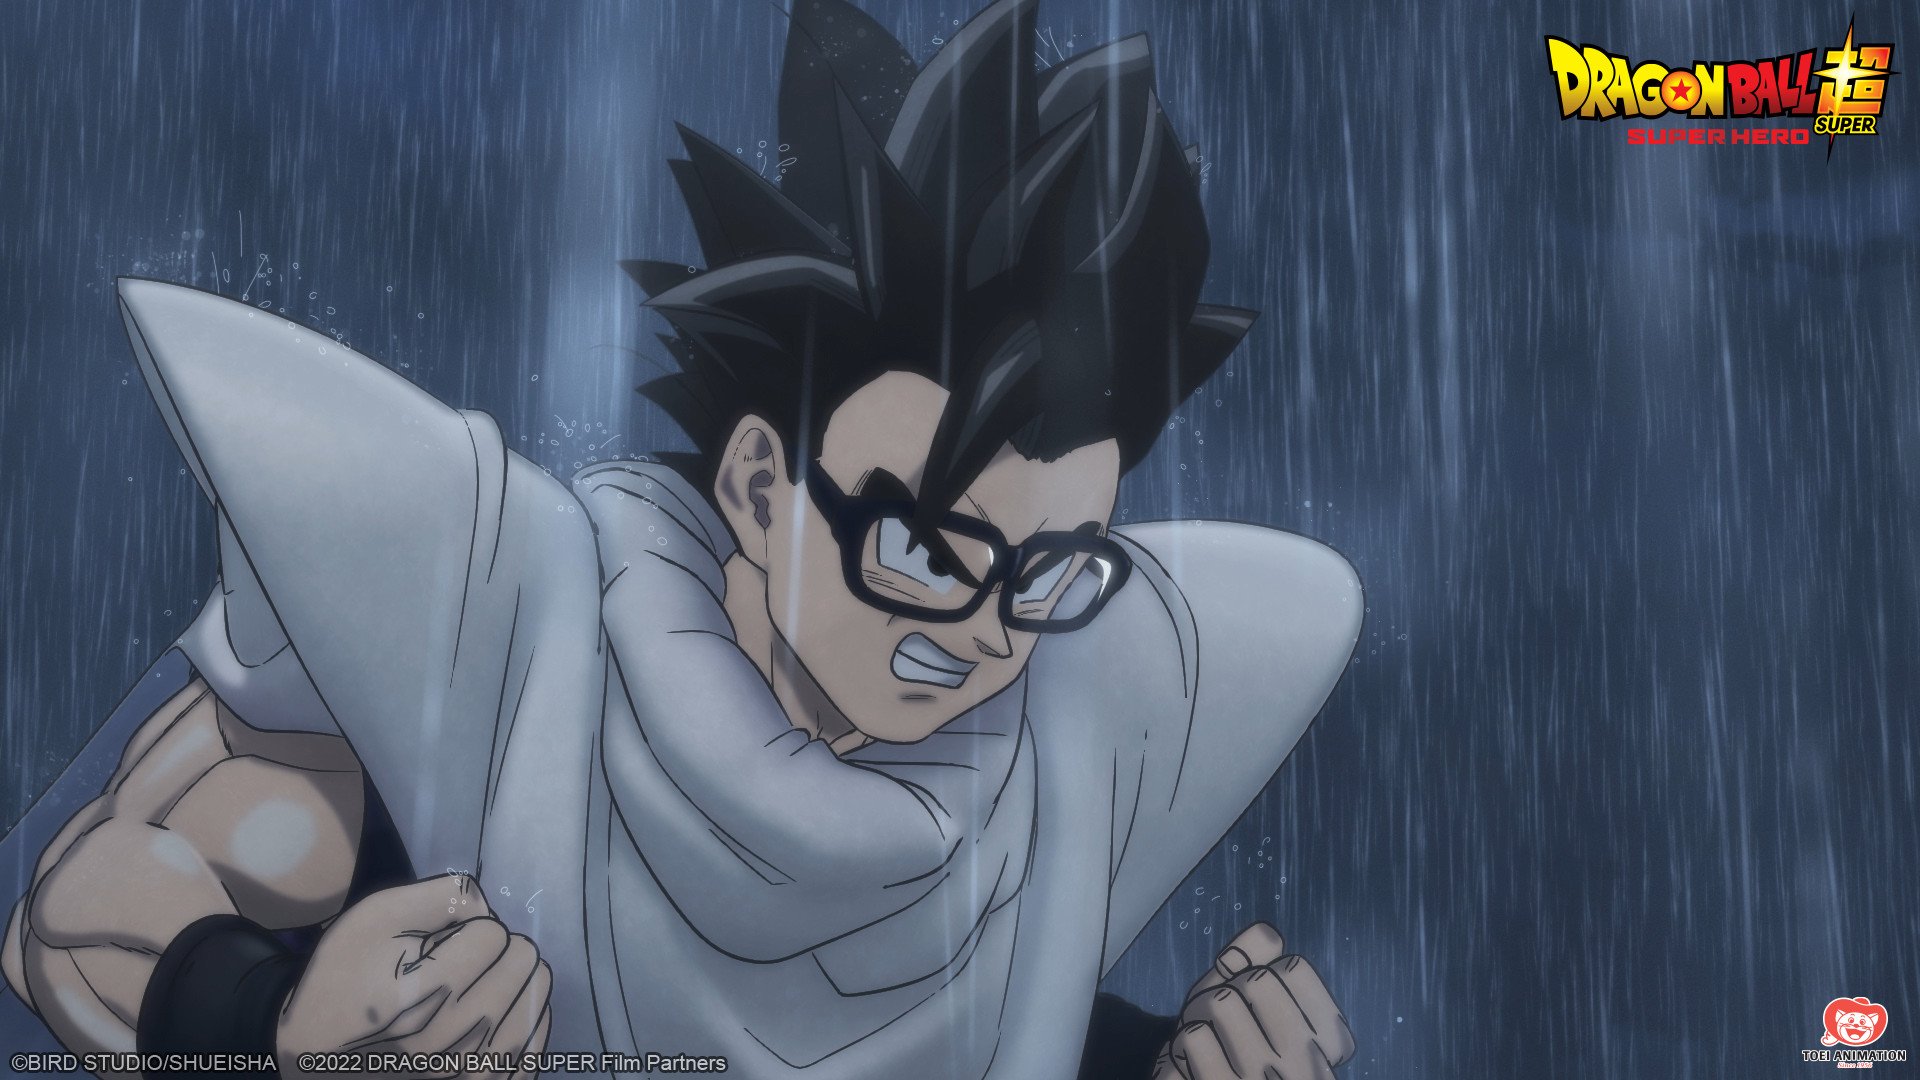 A shot of Gohan in 'Dragon Ball Super: Super Hero' for our article about the end-credits scene. He's standing in the rain and holding up his fists.